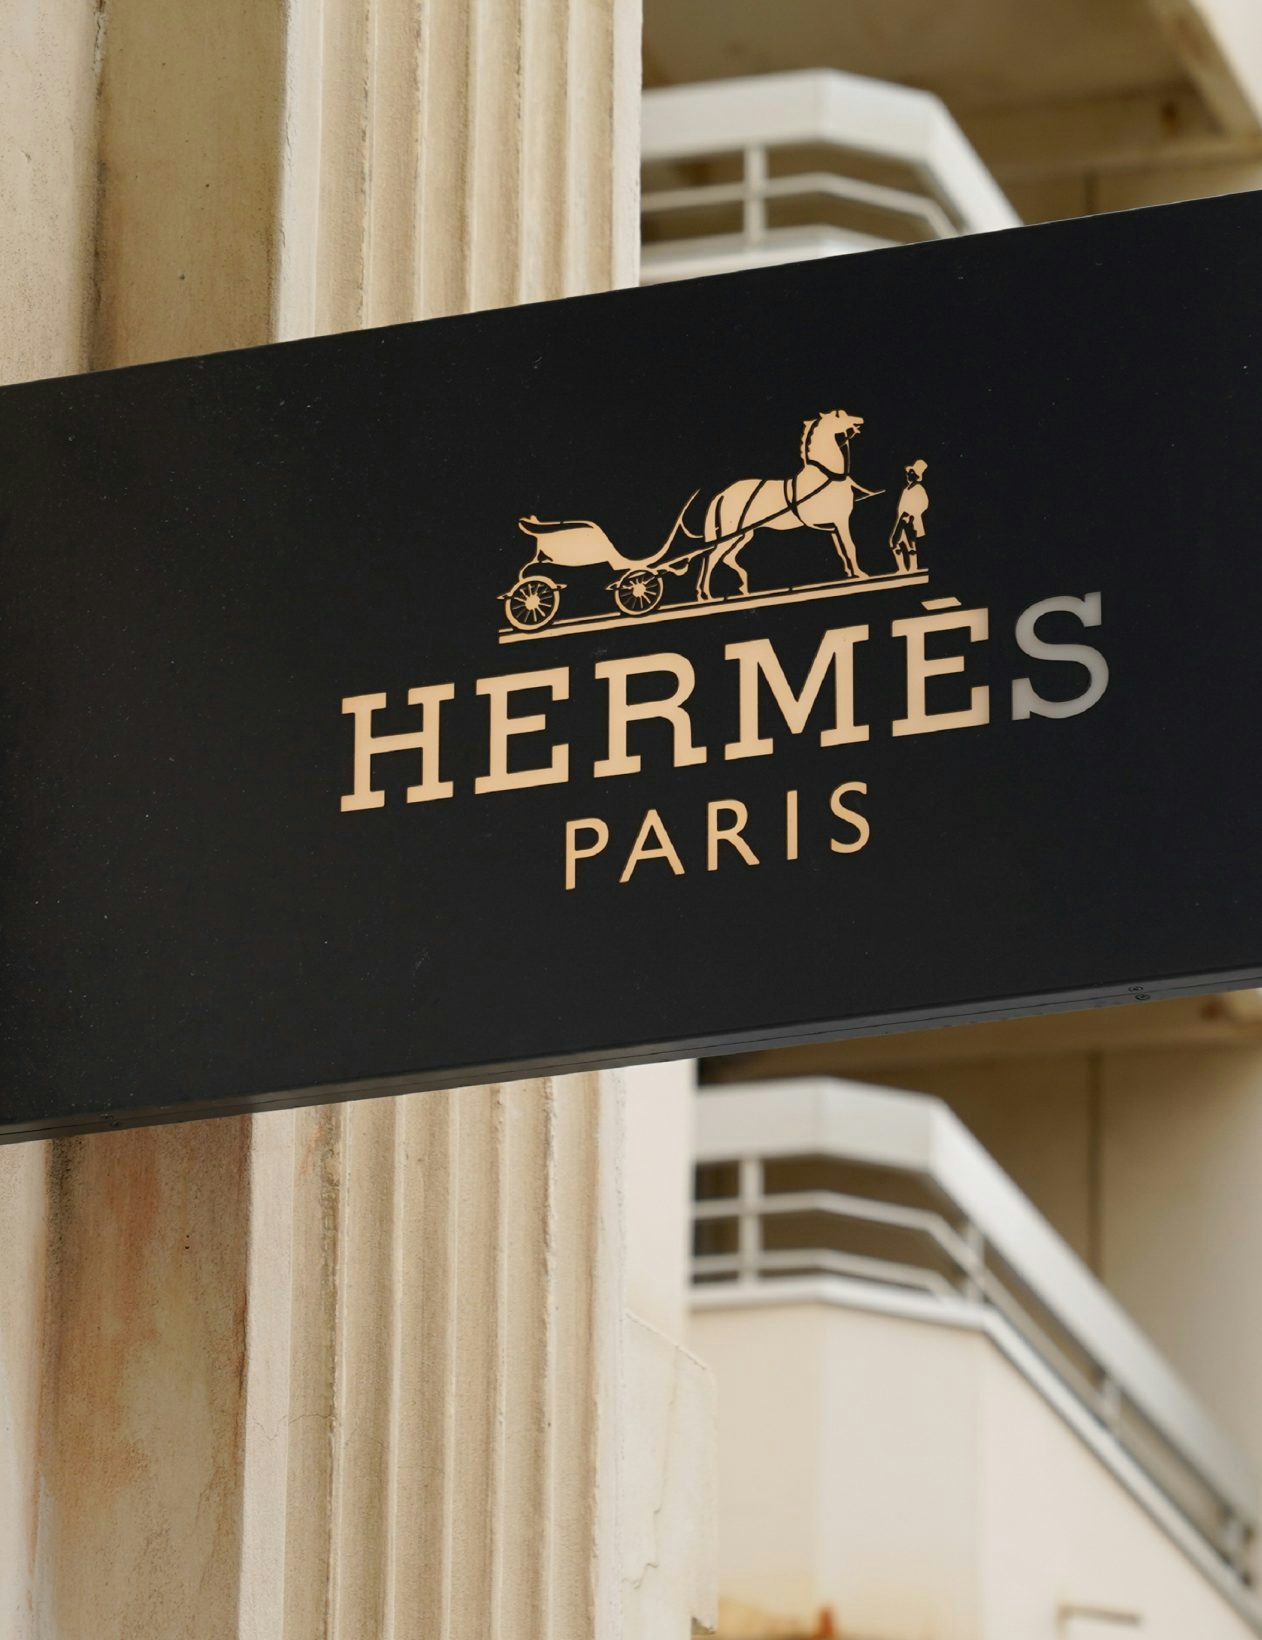 Hermès started 2023 with positive figures for the first quarter